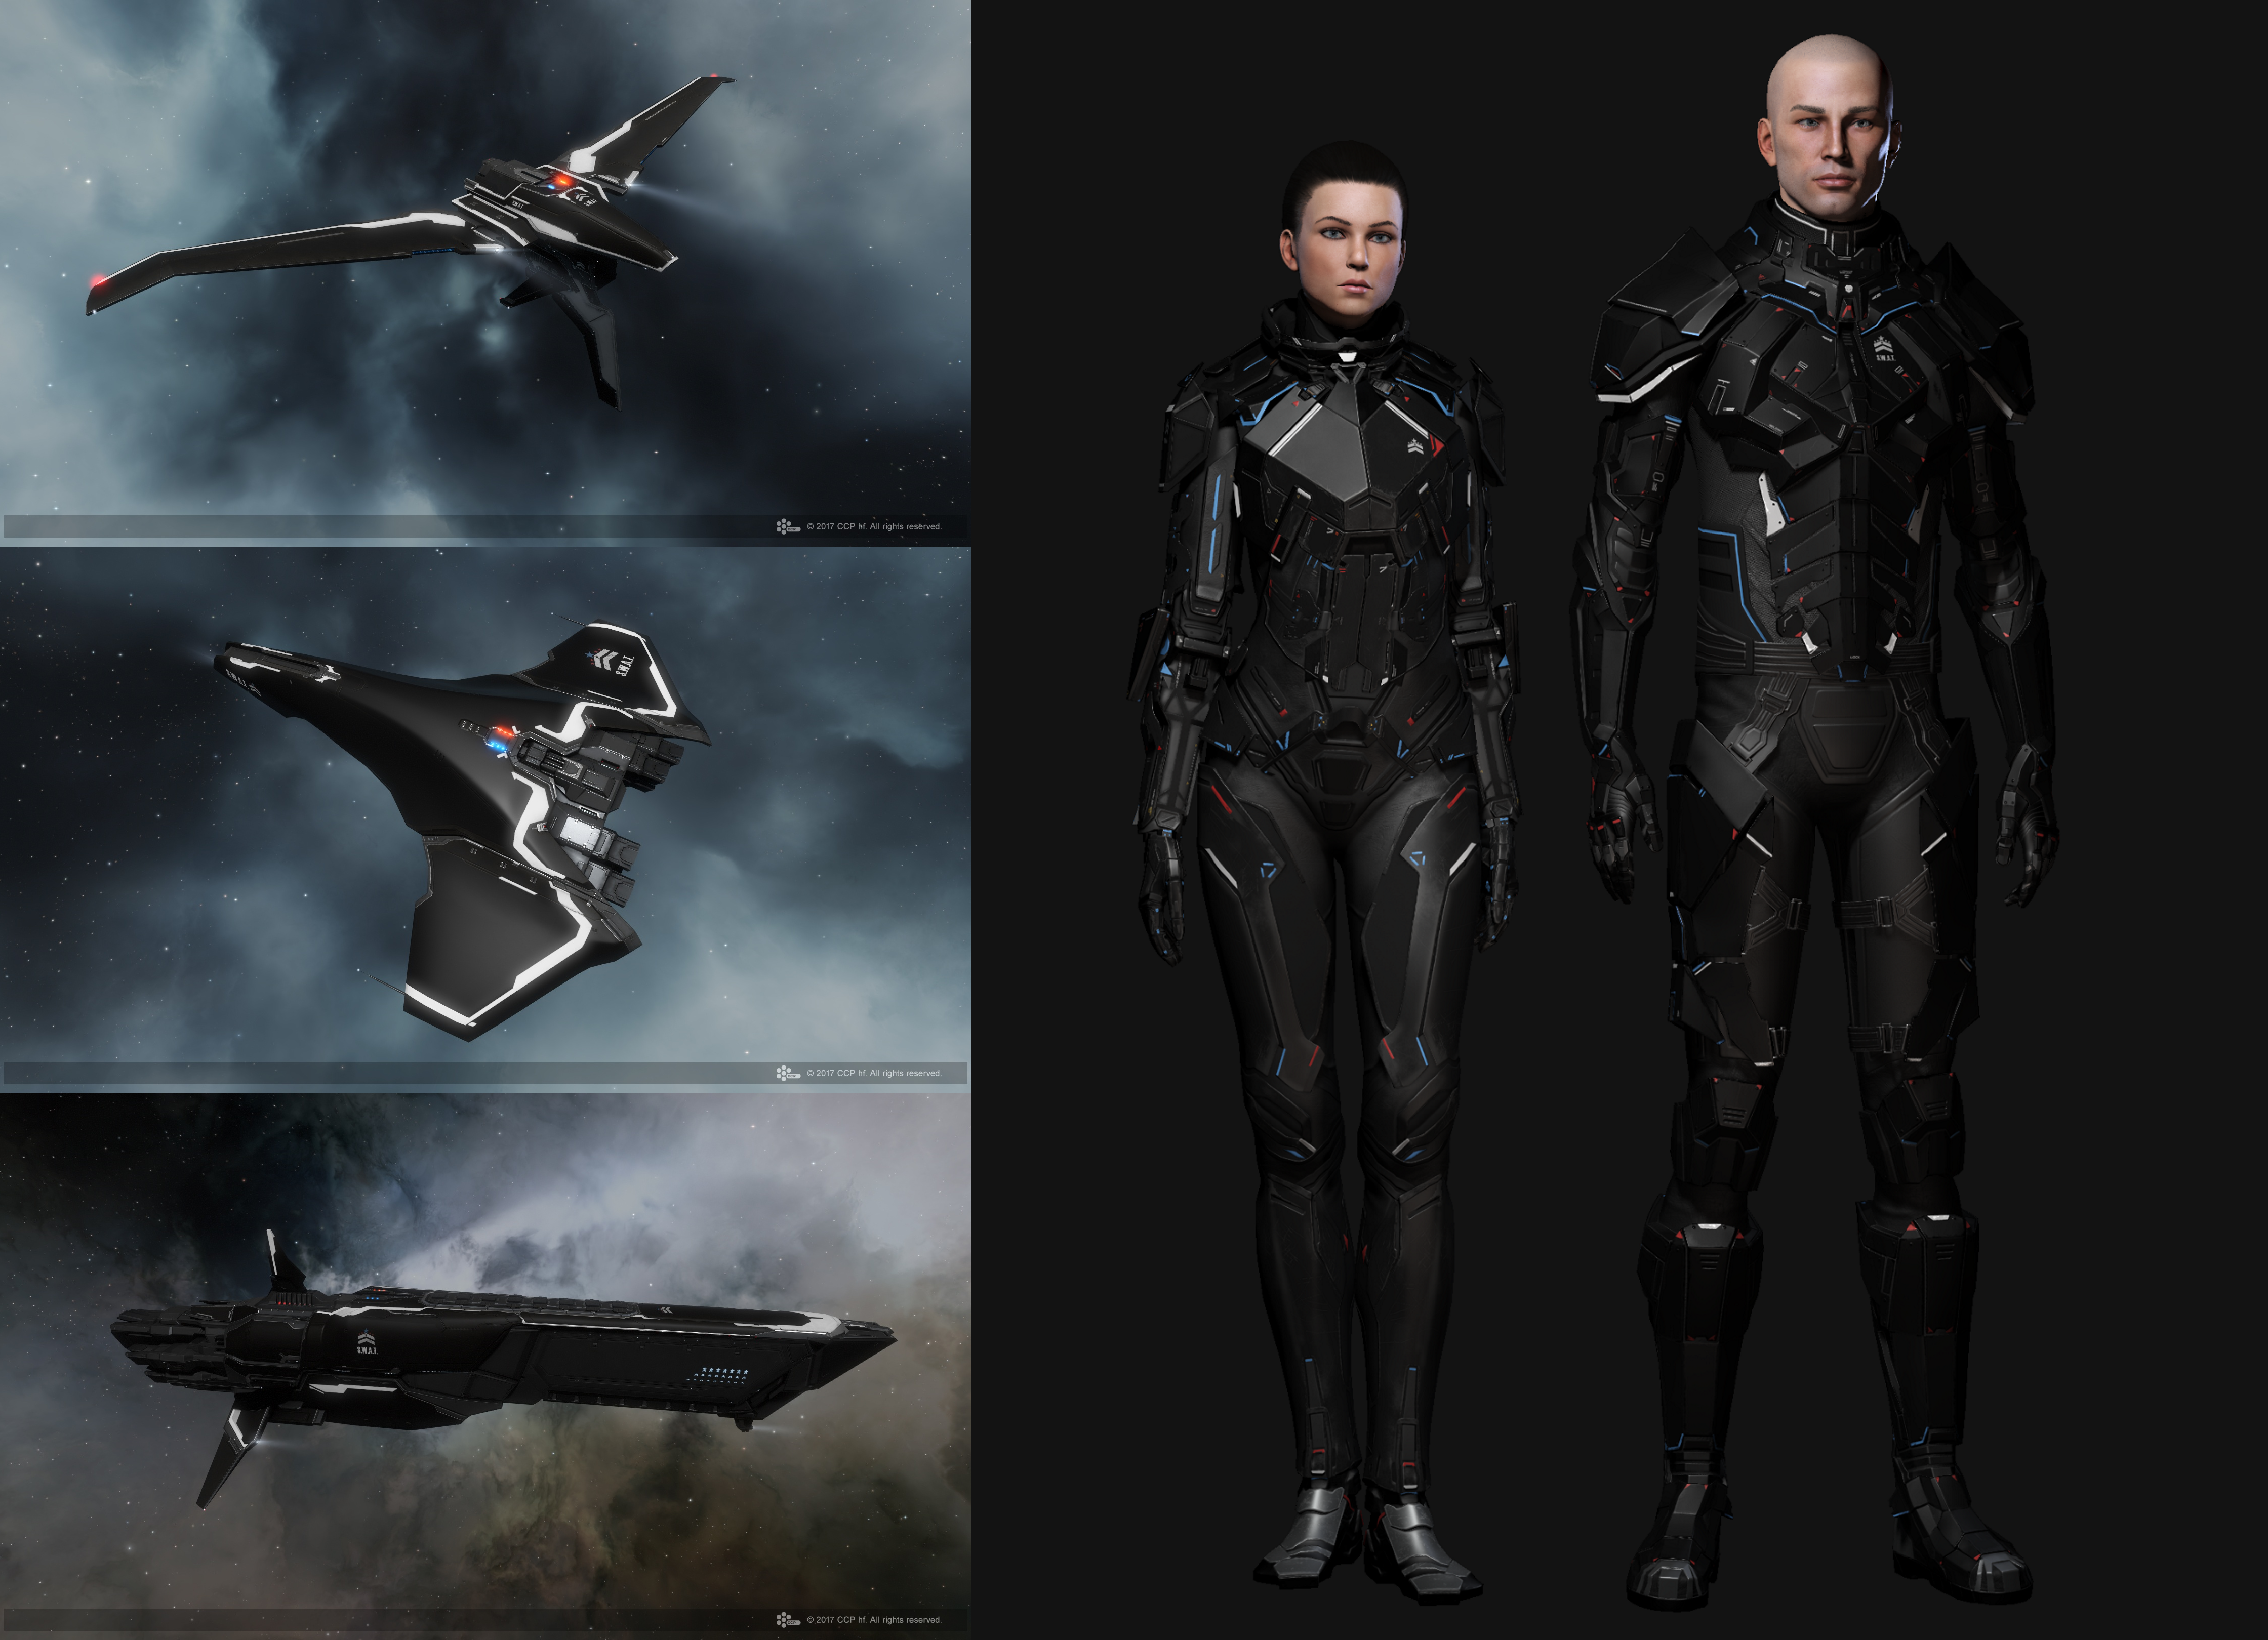 CONCORD SARO SKINs & Combat Suits Gifted To Mystery Code Holders